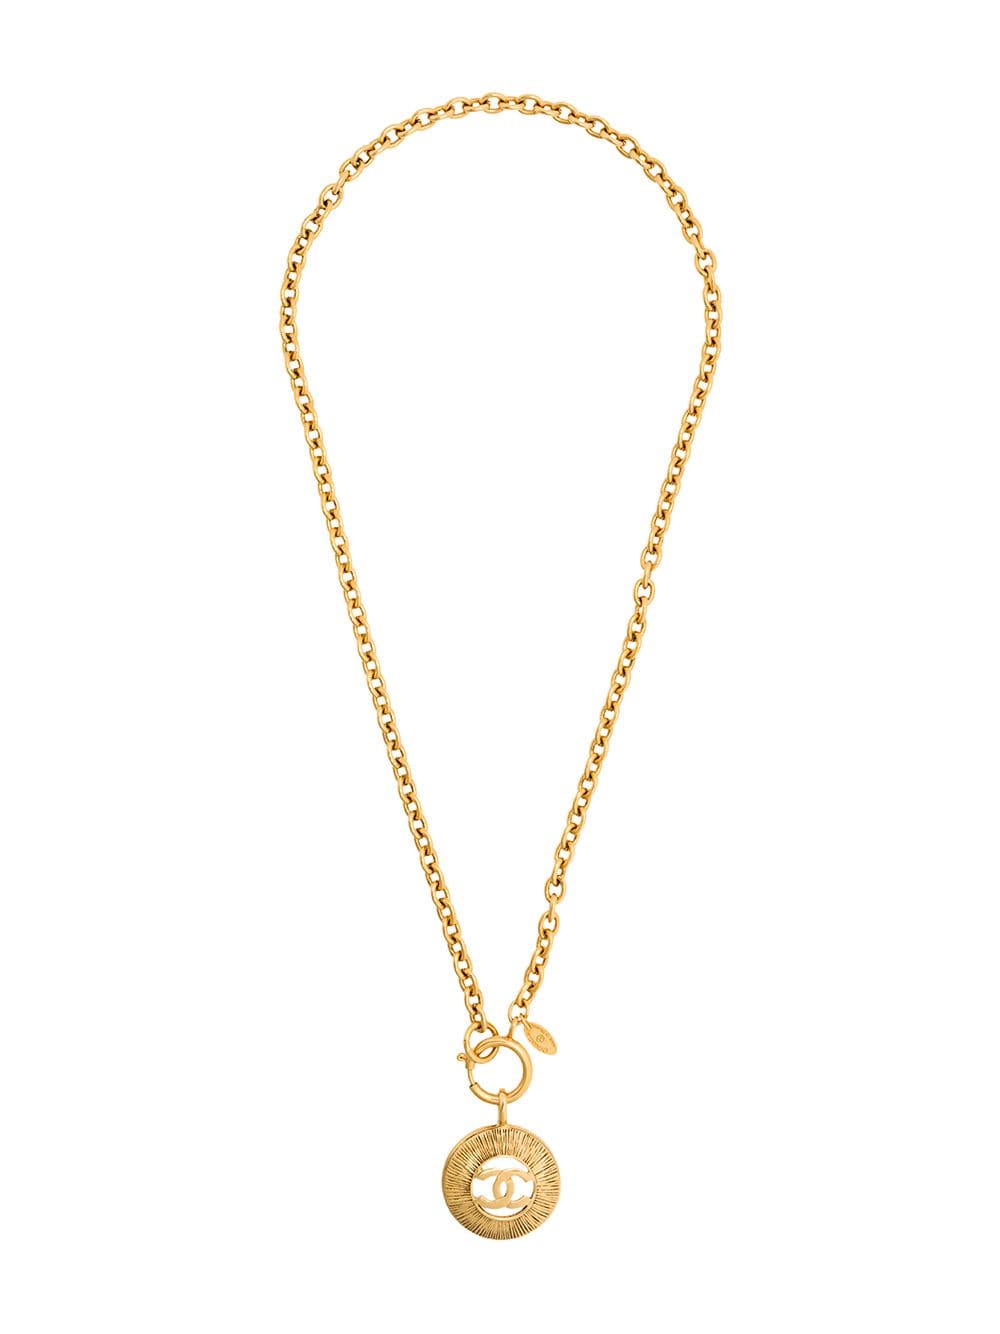 Chanel Pre-Owned 1980s Chanel Gold Plated Coin Pendant - Metallic